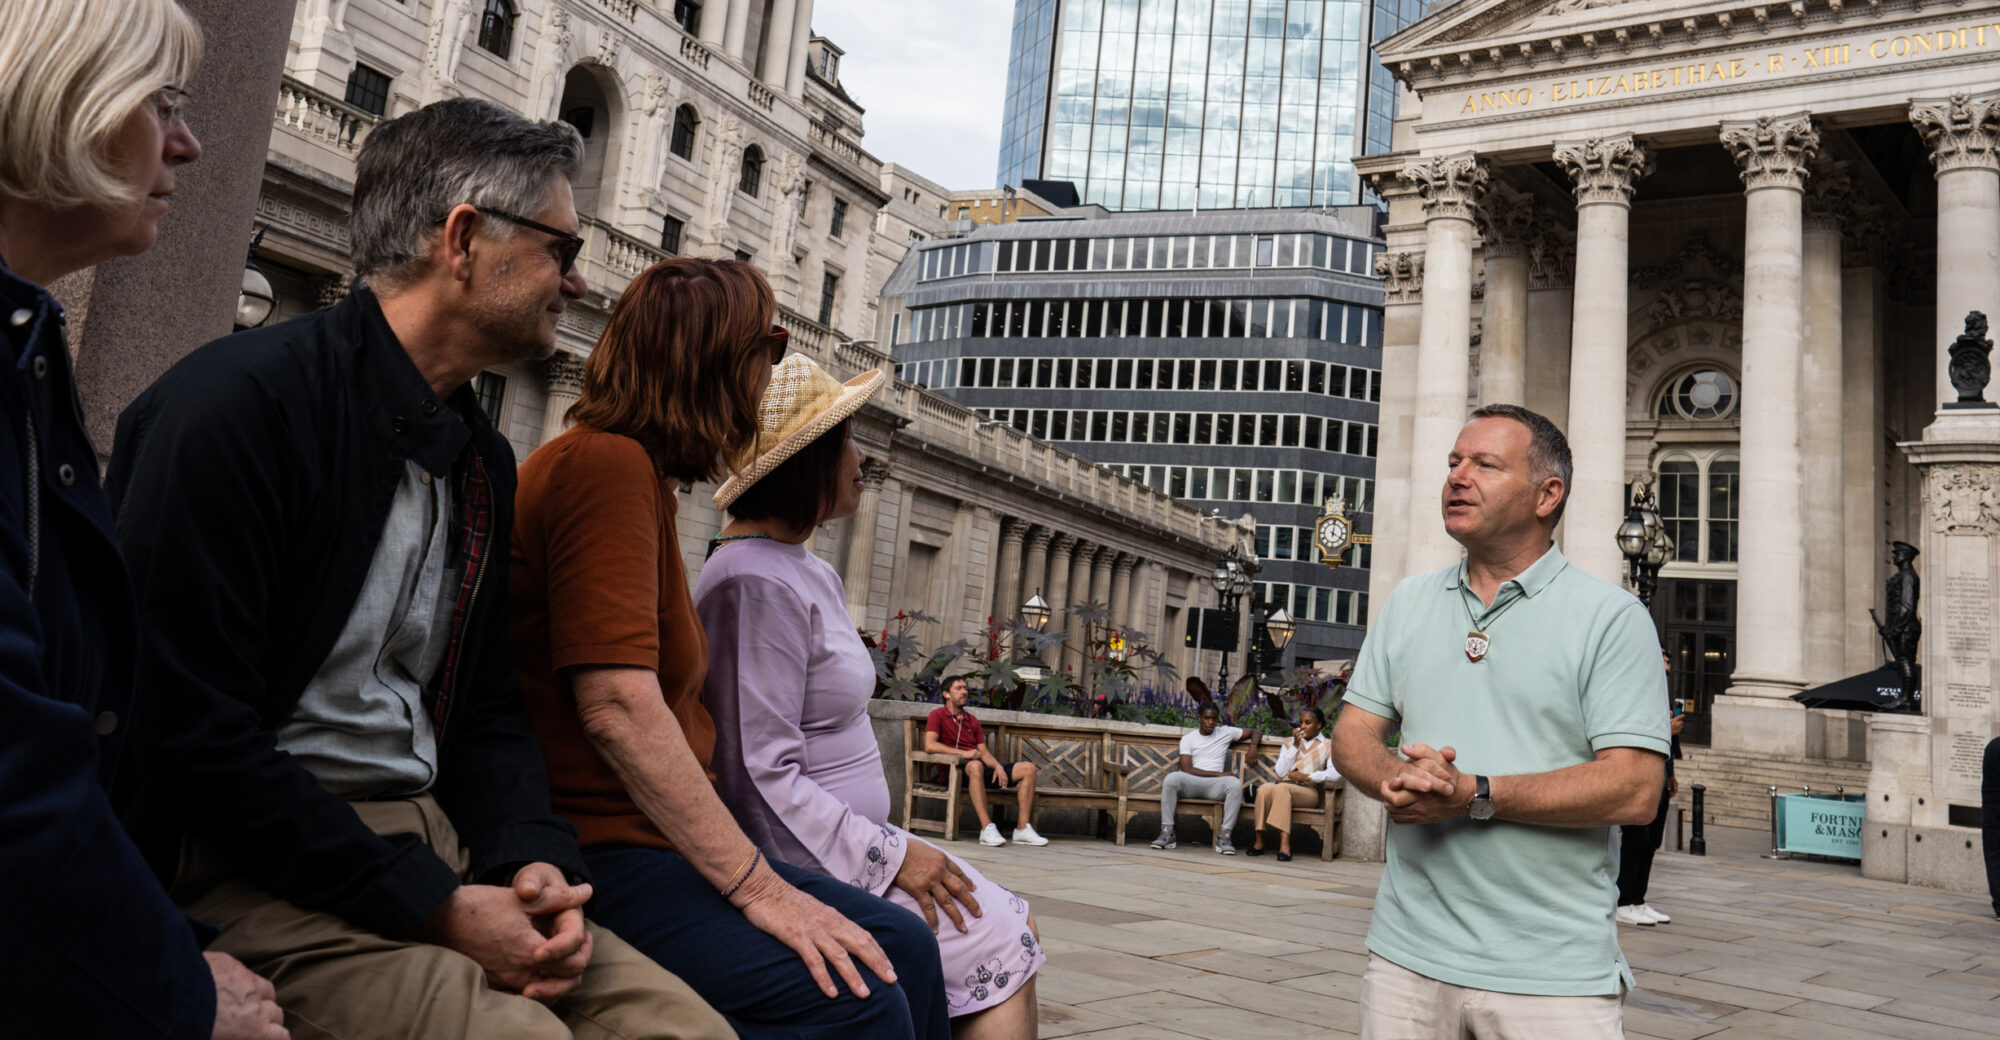 What's On - Guy F at Royal Exchange - walking guide talking to an audience